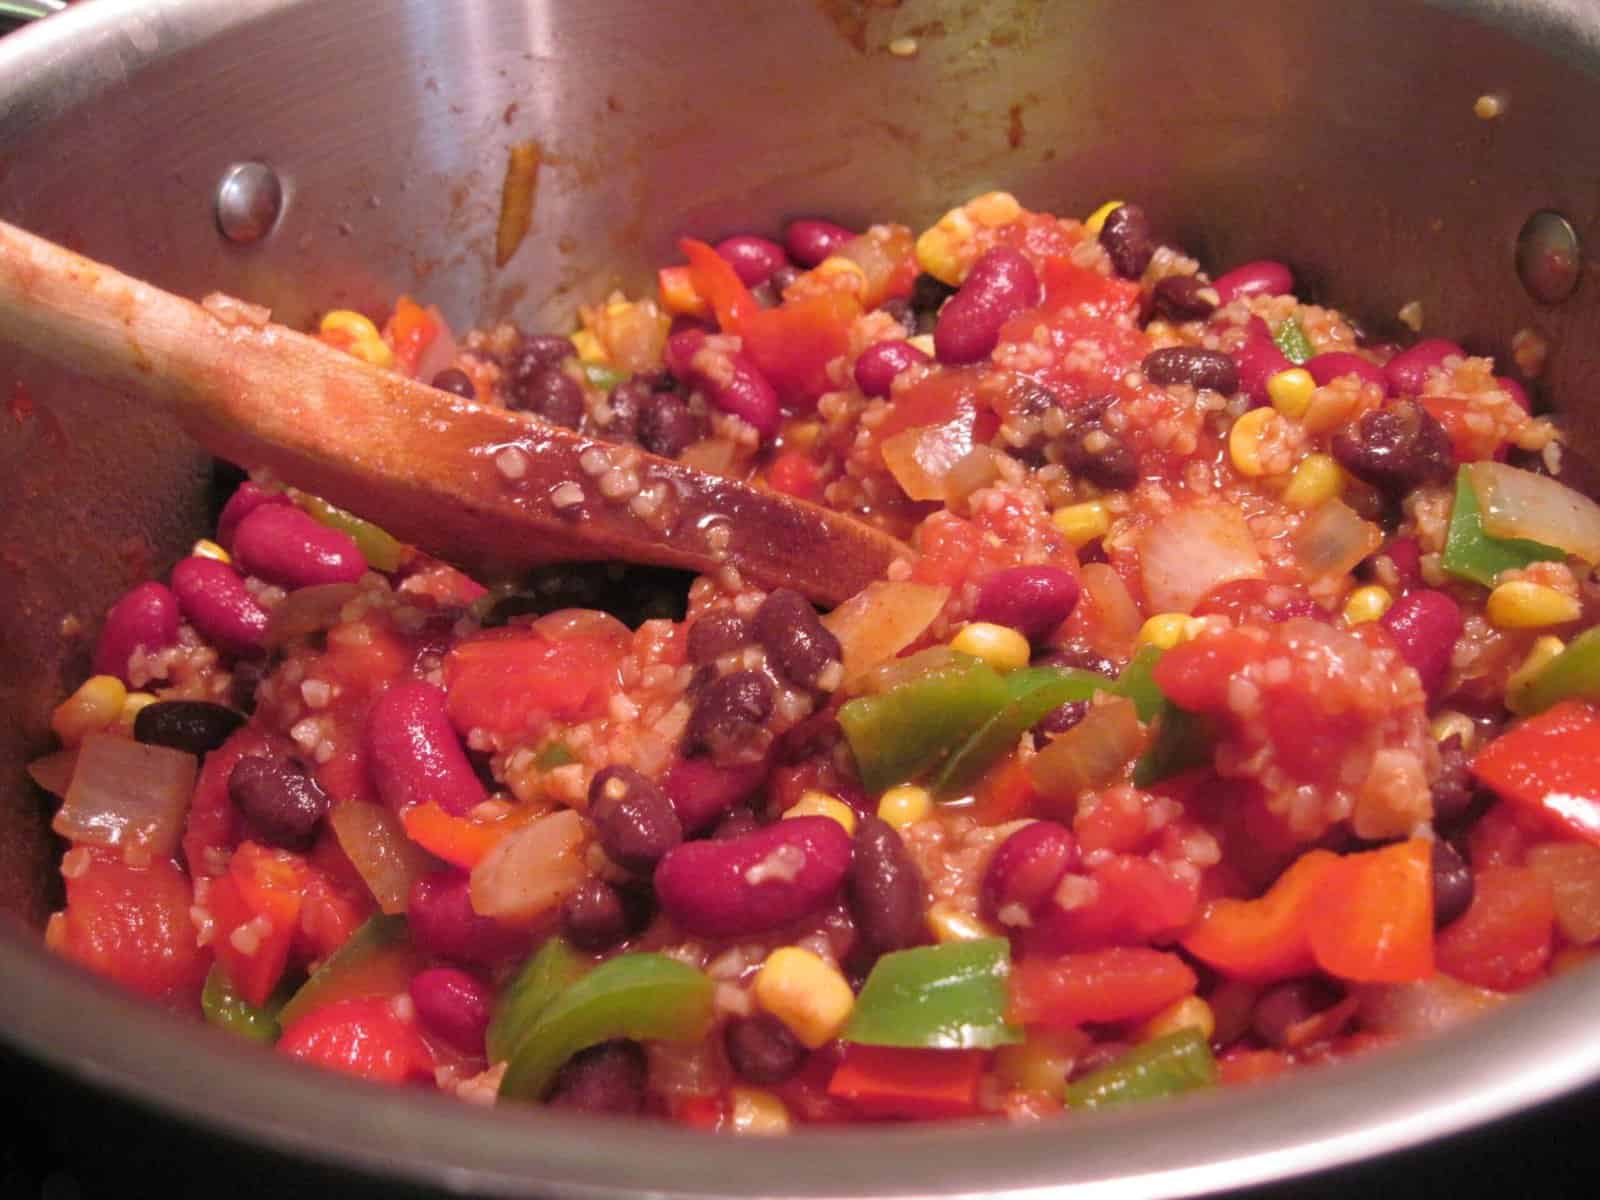  A hearty and satisfying bowl of Moosewood chili